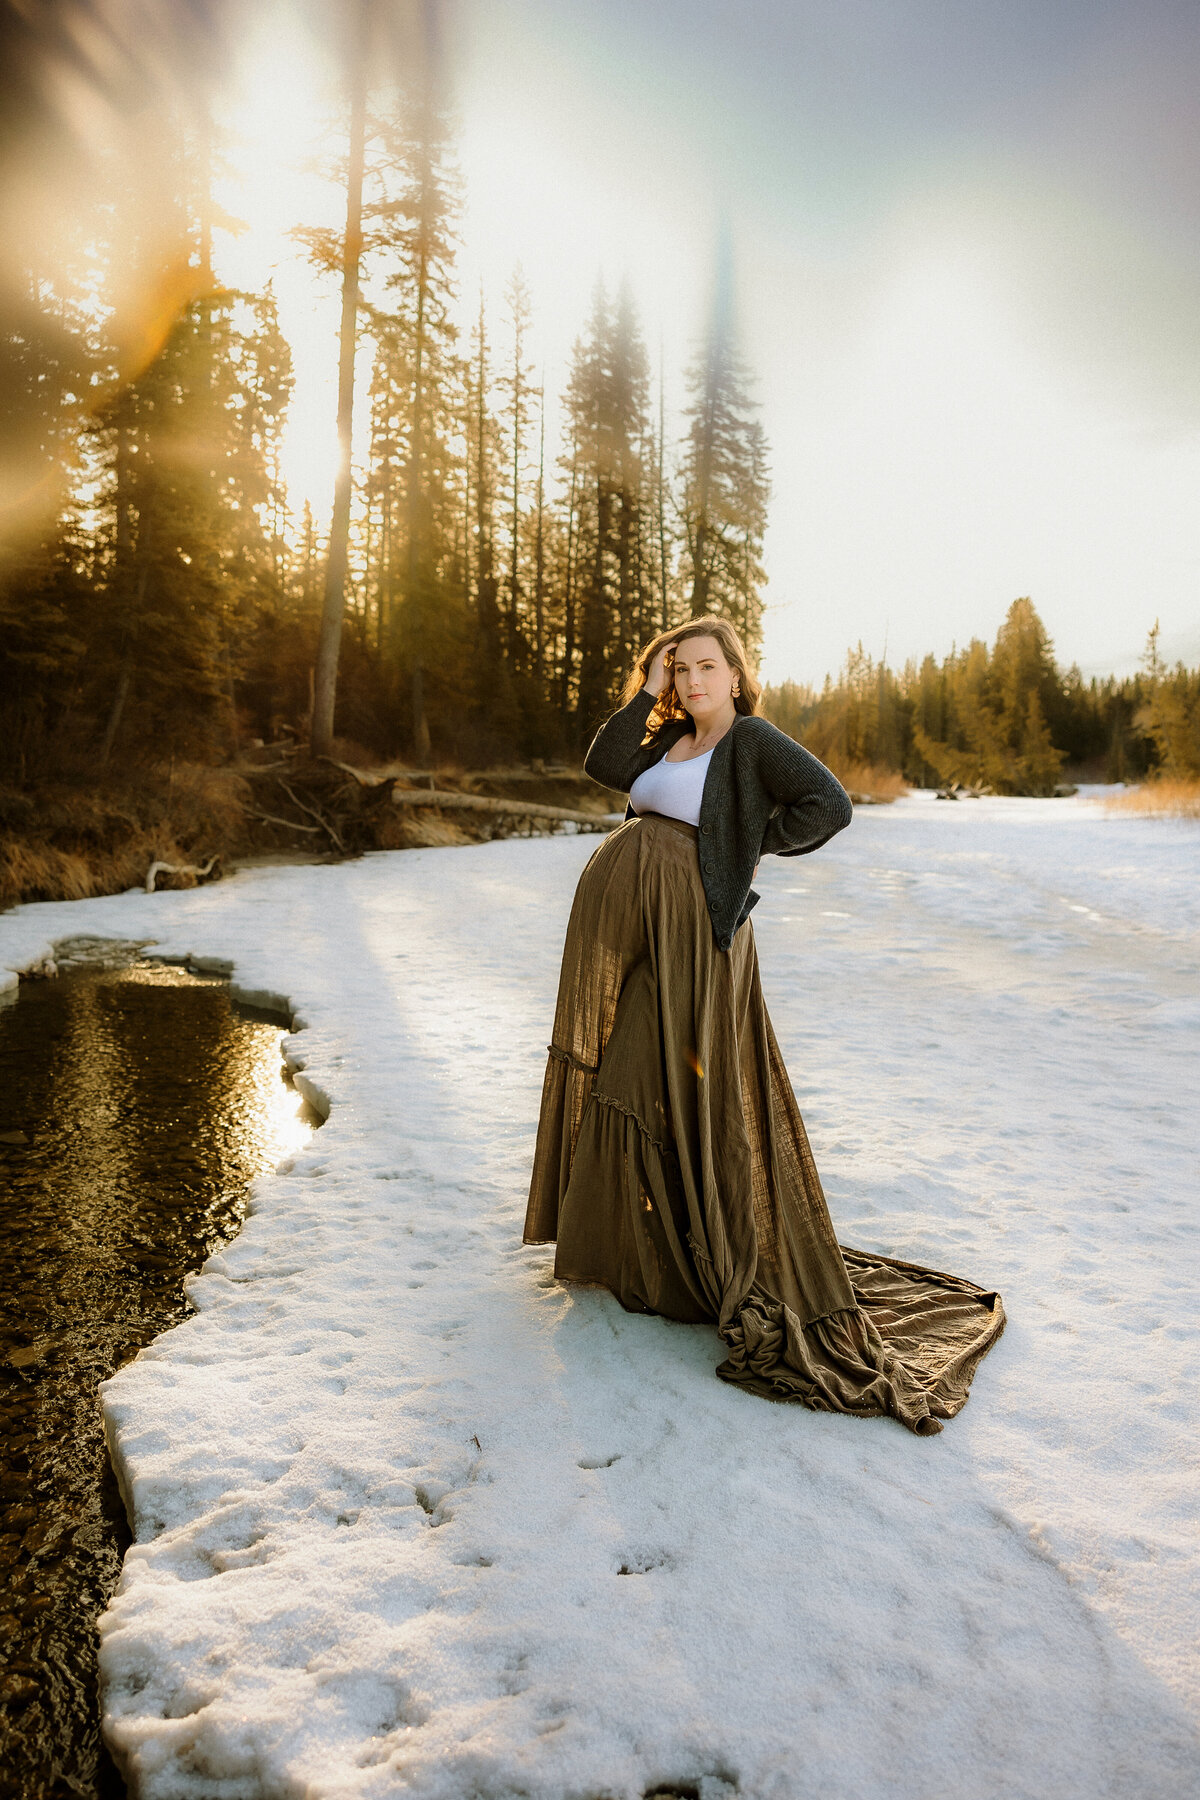 At Haley Skof Photography, we specialize in embracing the beauty of expecting moms in Calgary. Join us for a session that highlights the radiance and anticipation of motherhood